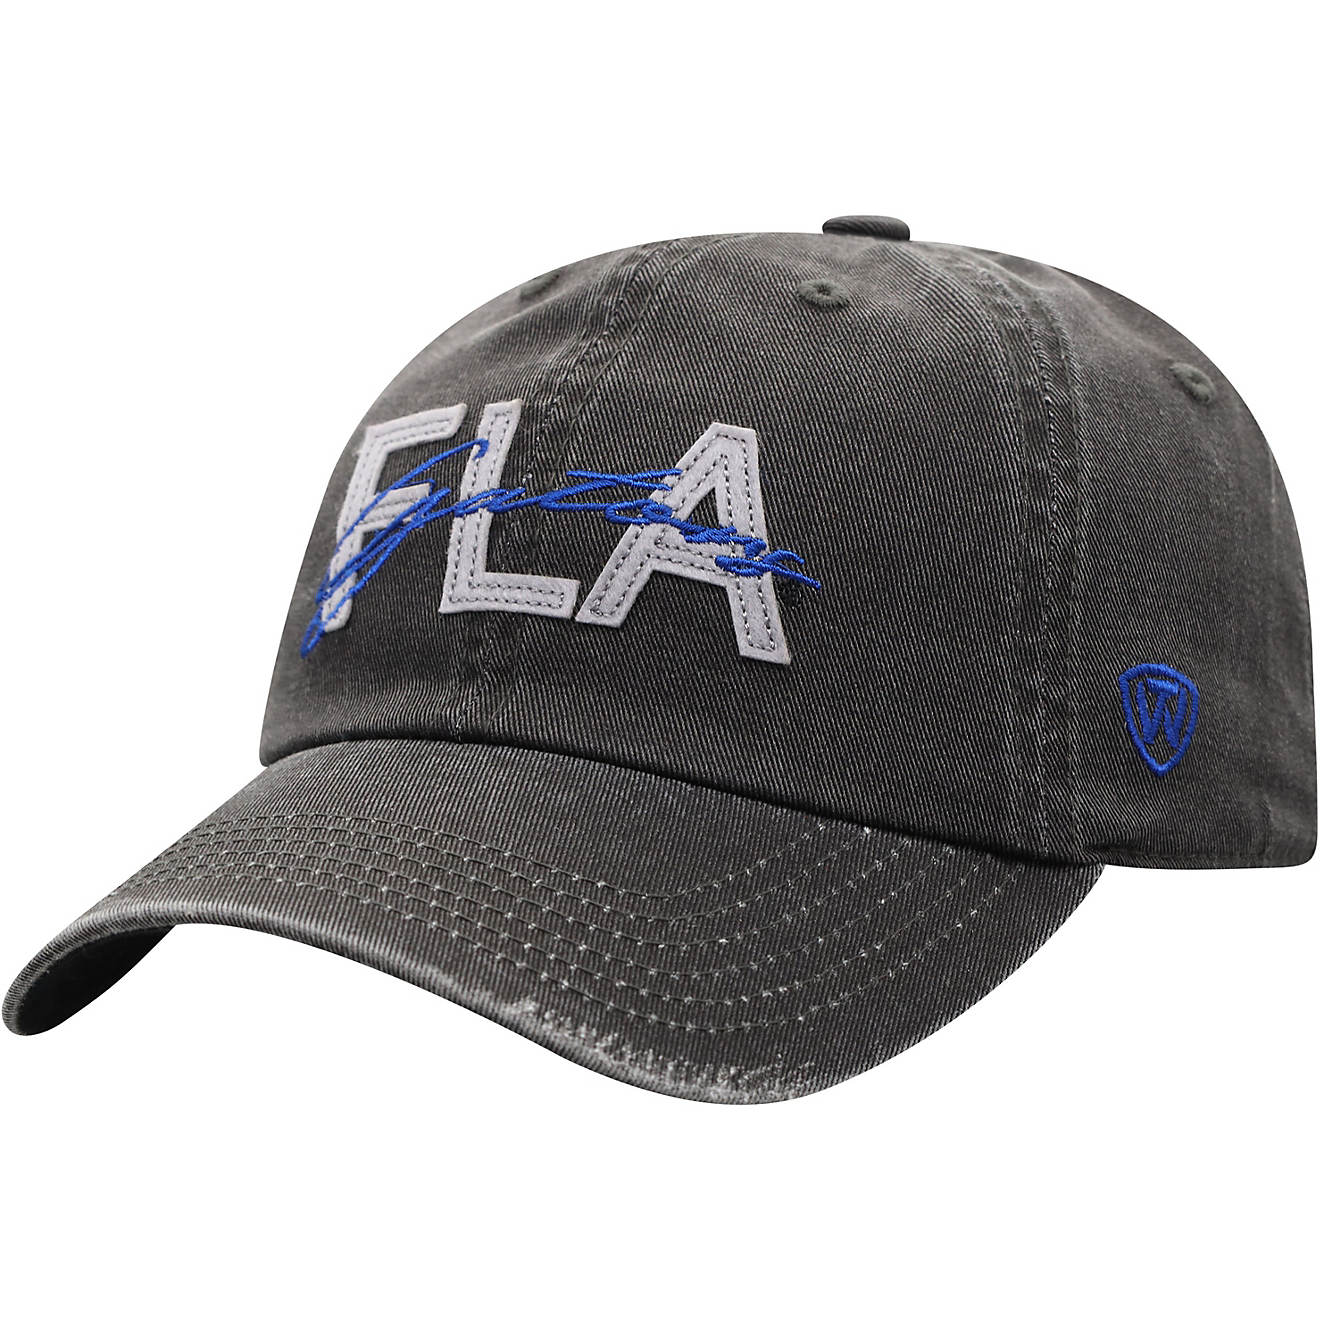 Top of the World Women's University of Florida Sola ADJ Cap                                                                      - view number 1